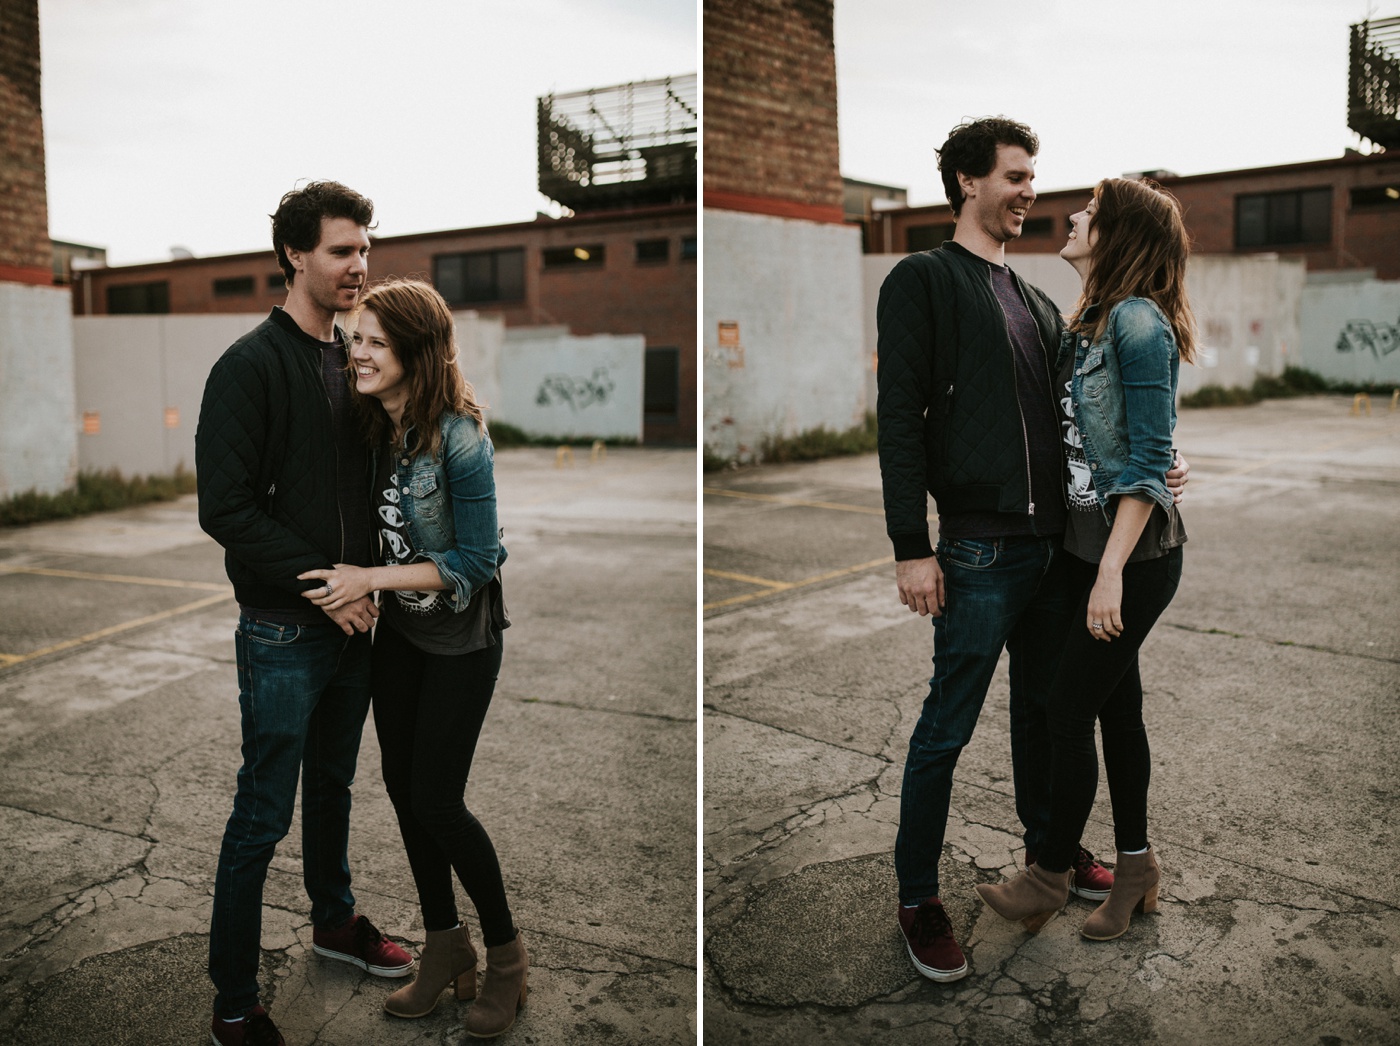 heli-alex_melbourne-fun-candid-gritty-relaxed-city-urban-couples-engagement-session_melbourne-wedding-photography_22